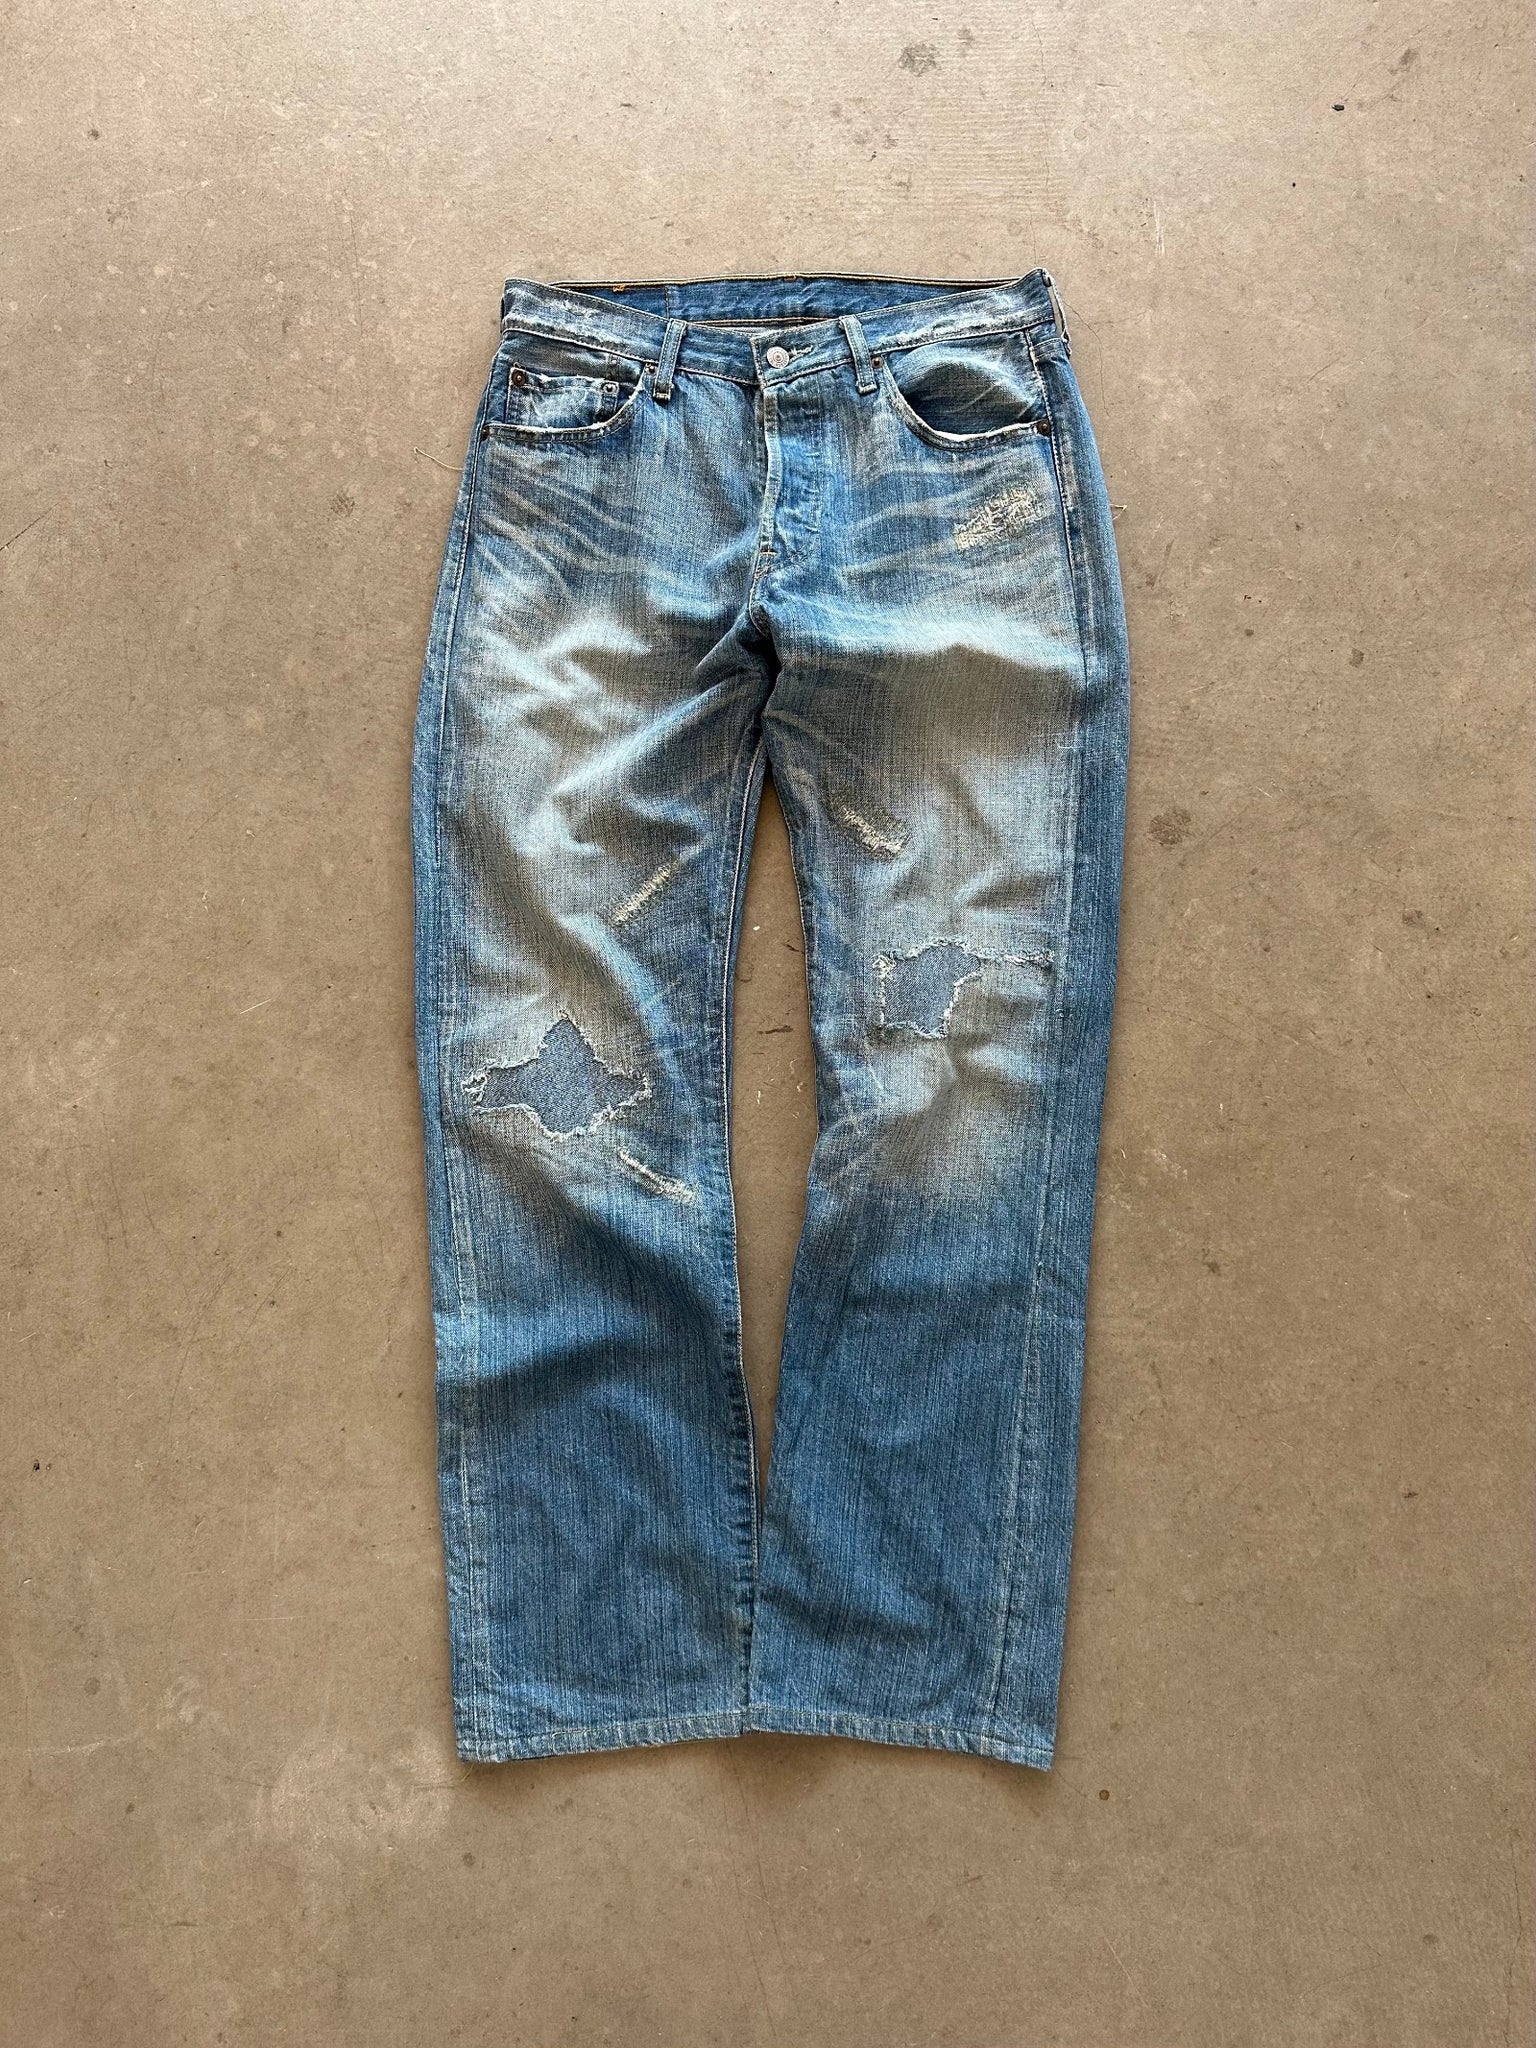 1990's Levi's 501 Repaired Jeans - 30 x 32